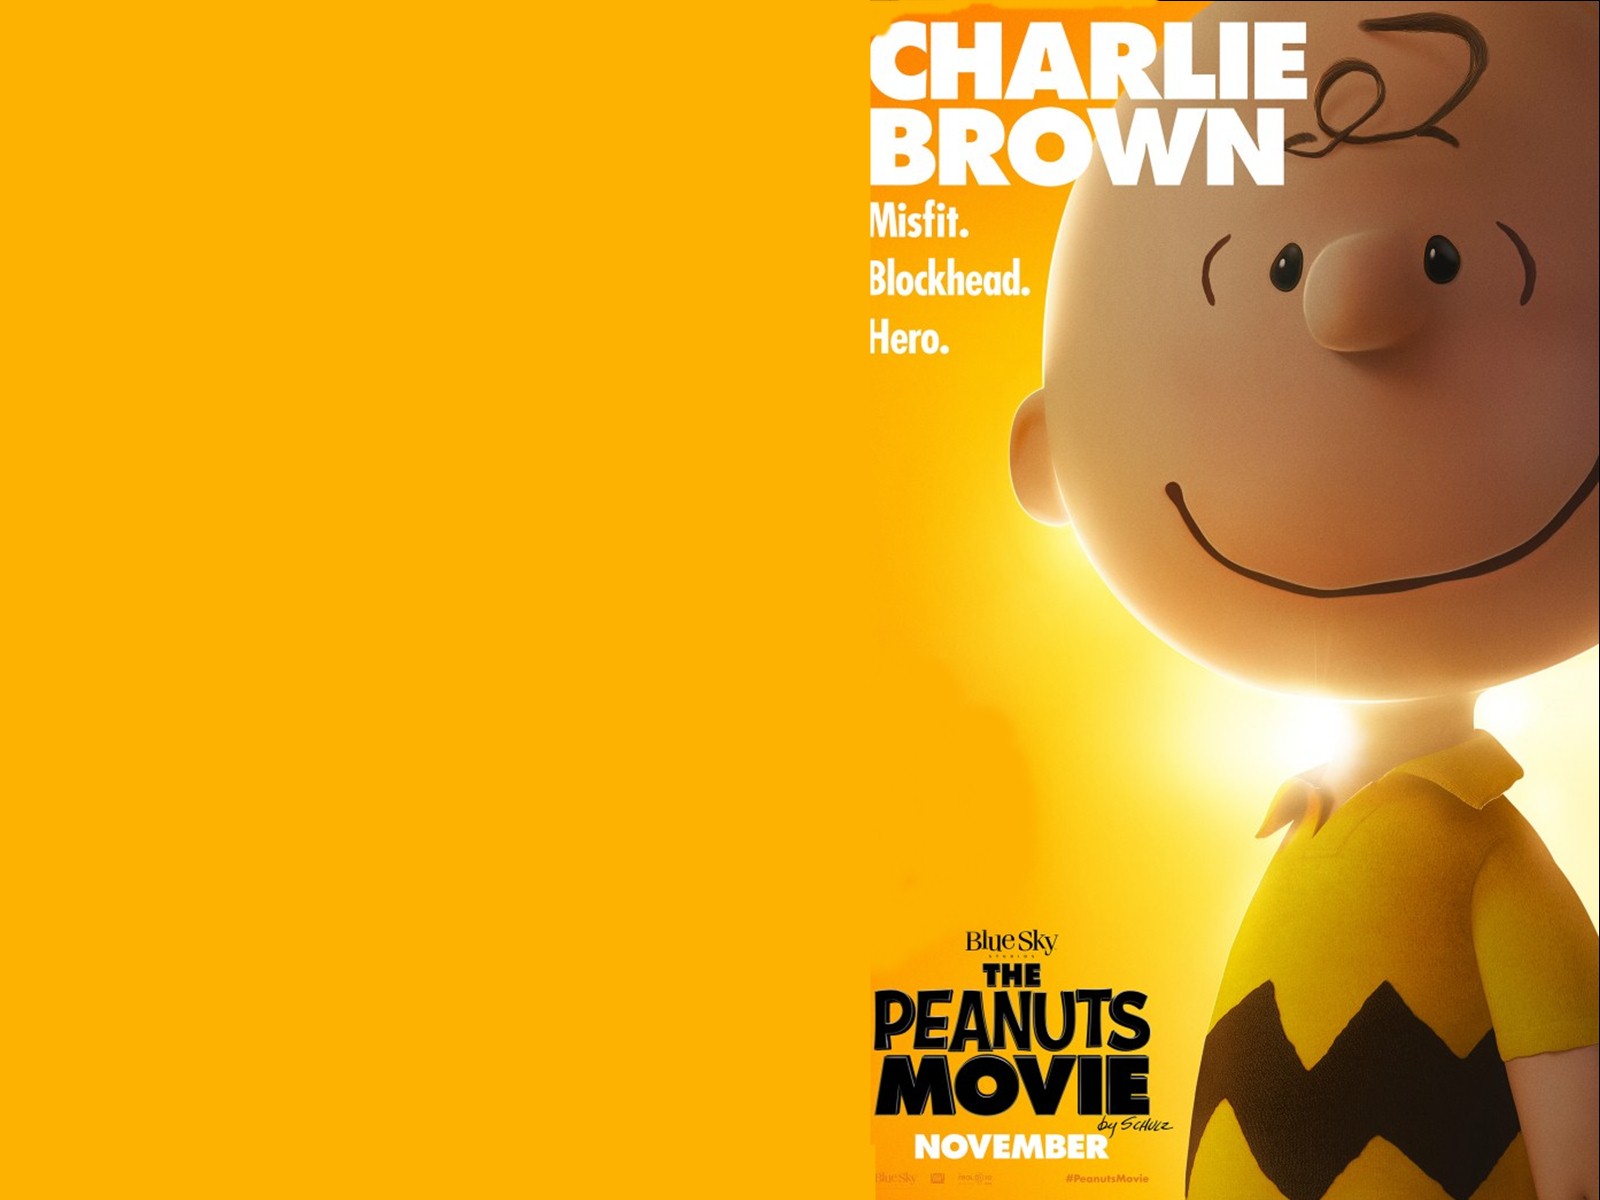 Free Download 13 2015 By Stephen Comments Off On The Peanuts Movie Images, Photos, Reviews